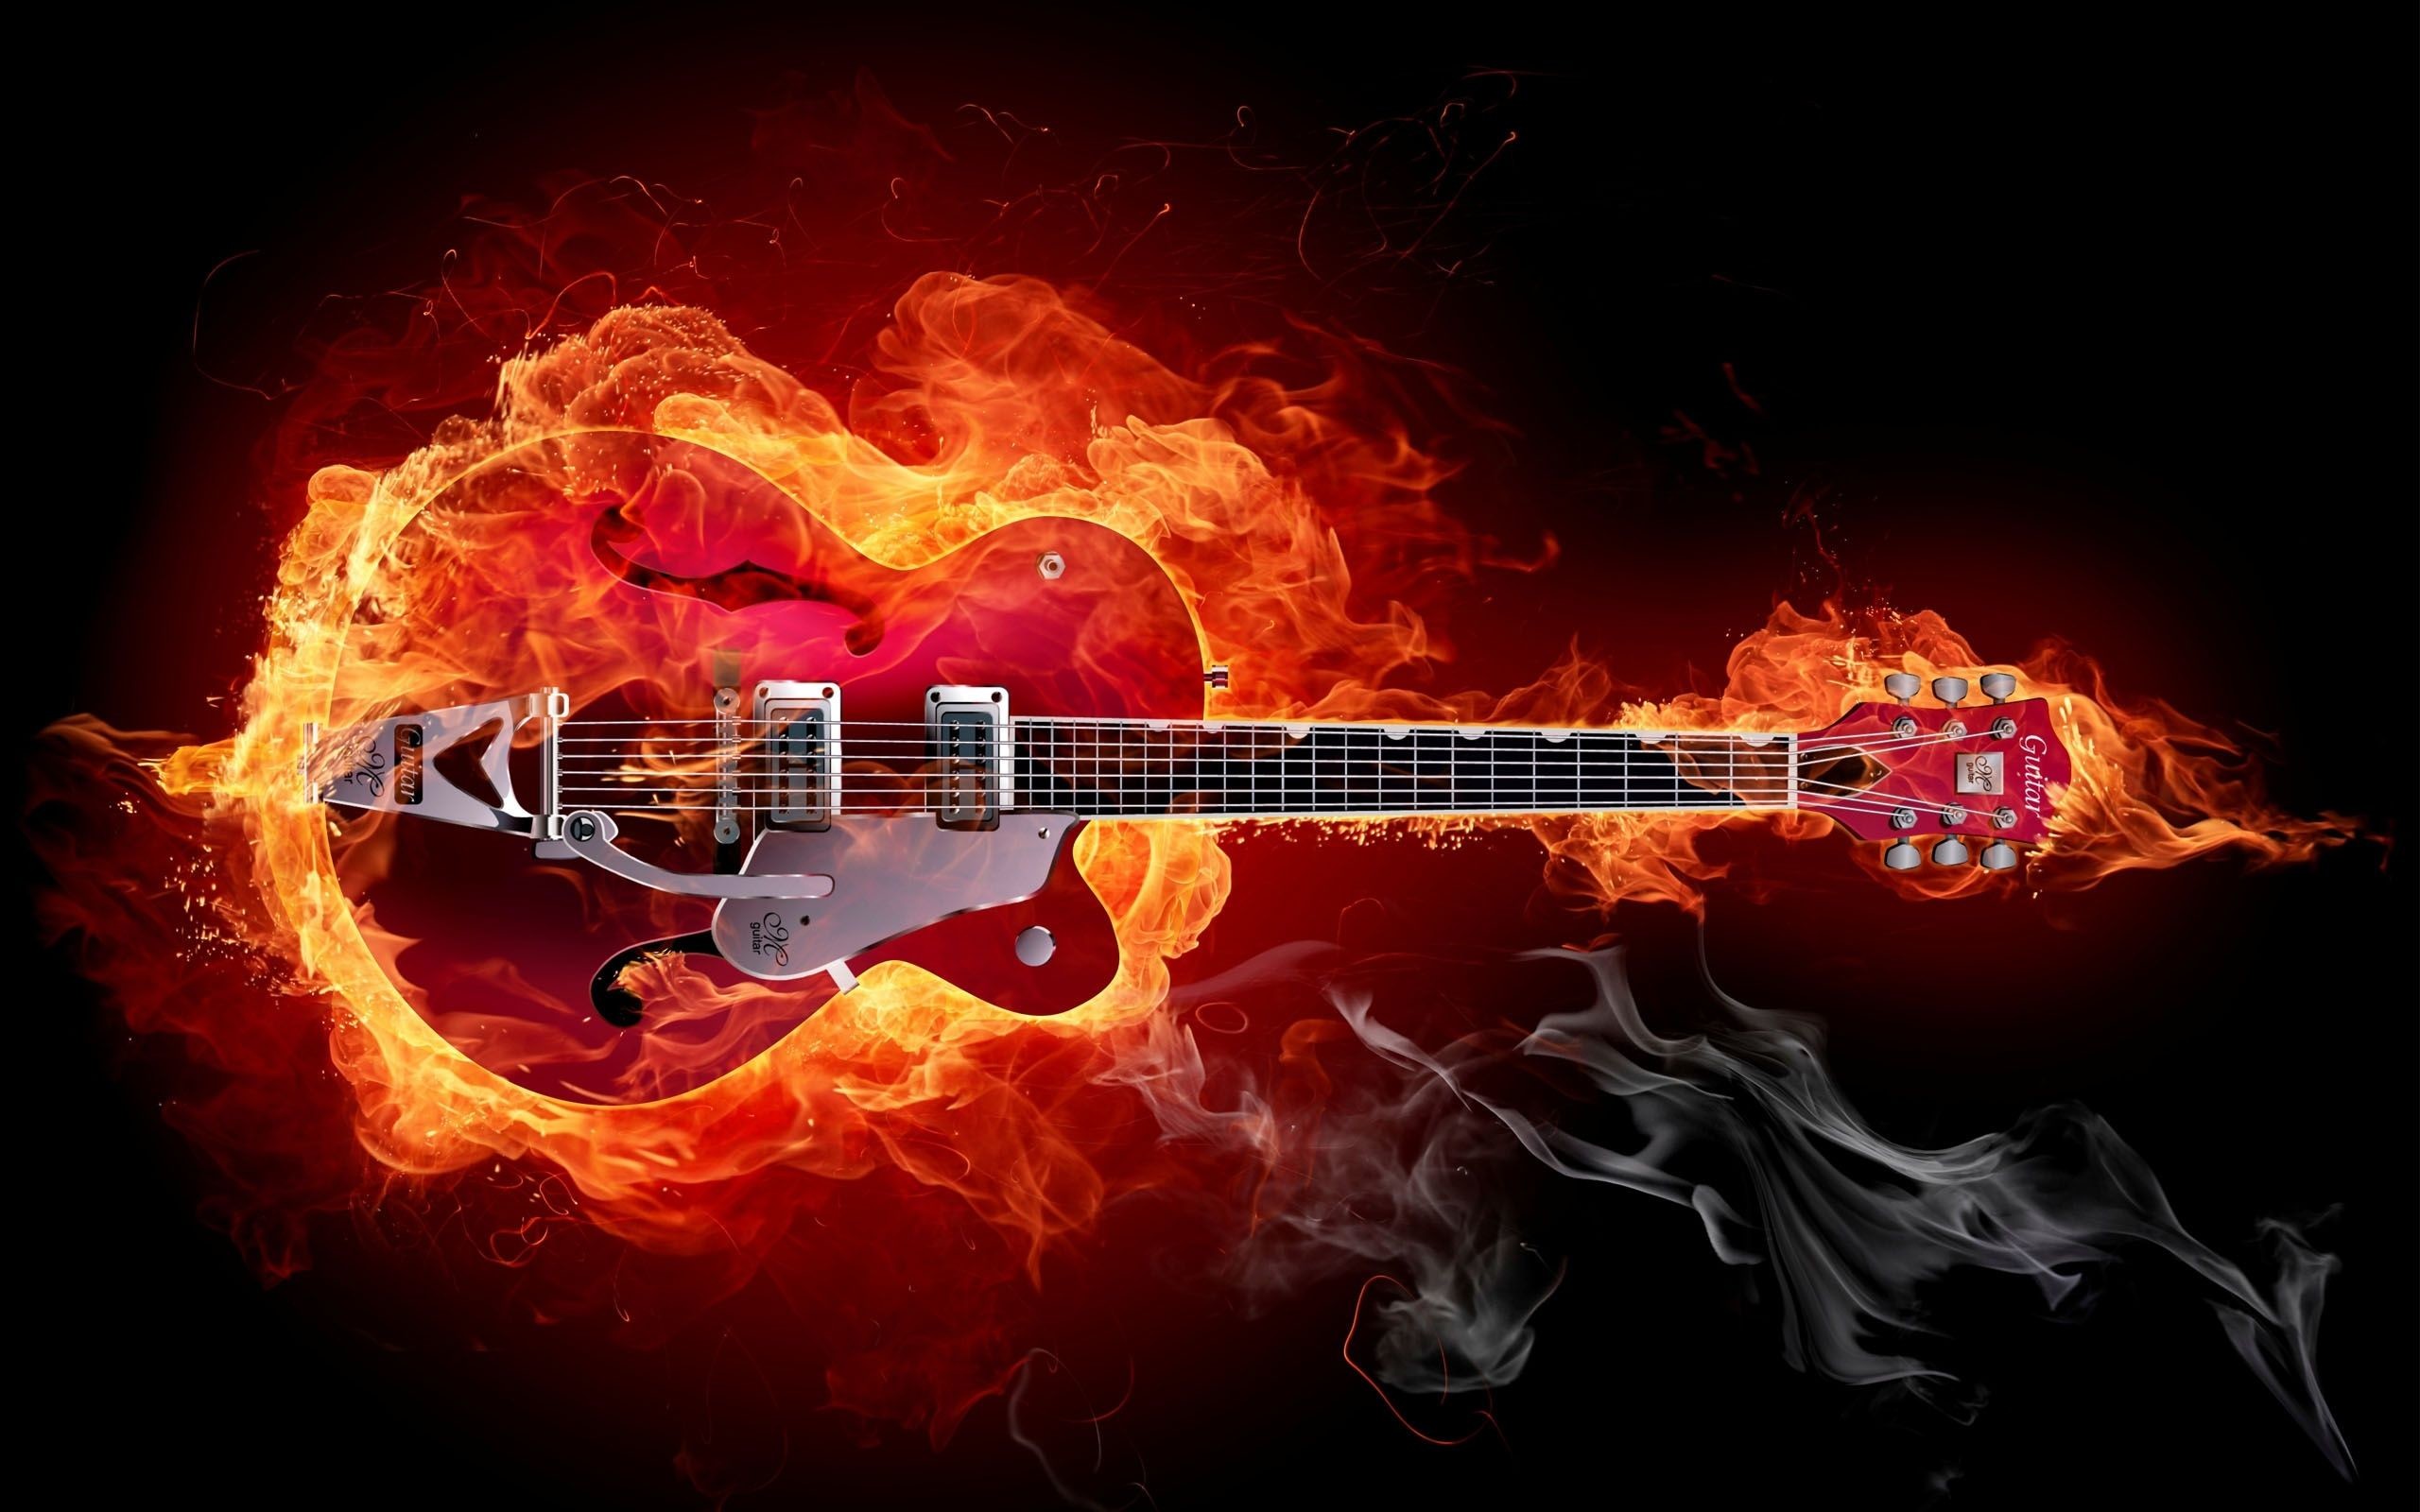 2560x1600 Rock Wallpapers - Free Rock Band Wallpapers and Rock 'N' Roll/metal .